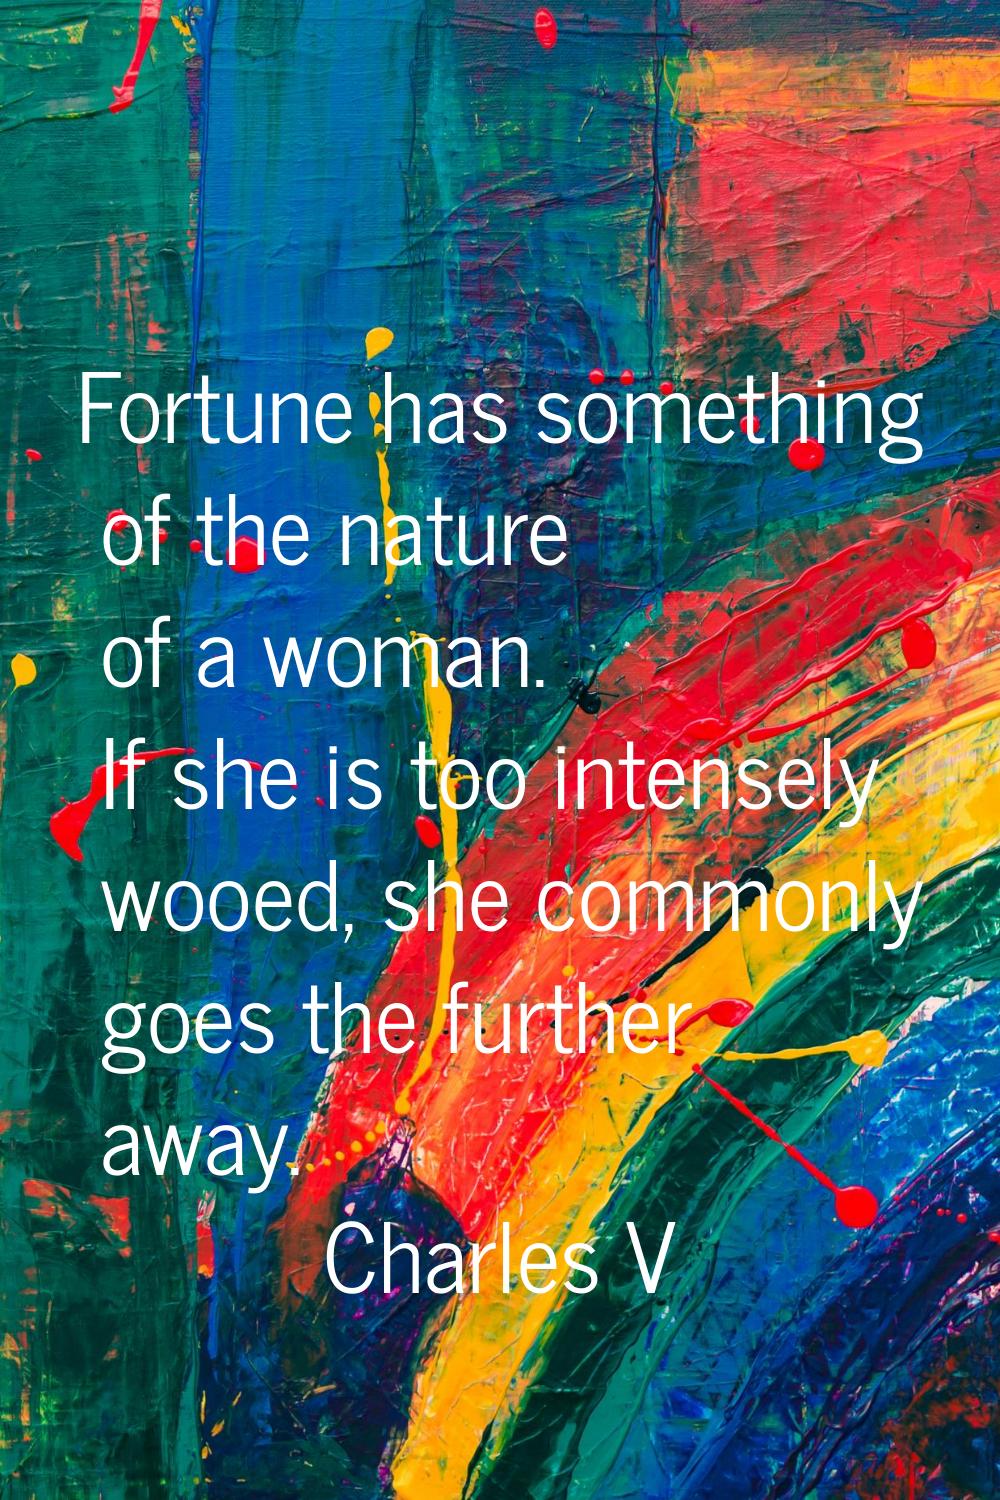 Fortune has something of the nature of a woman. If she is too intensely wooed, she commonly goes th